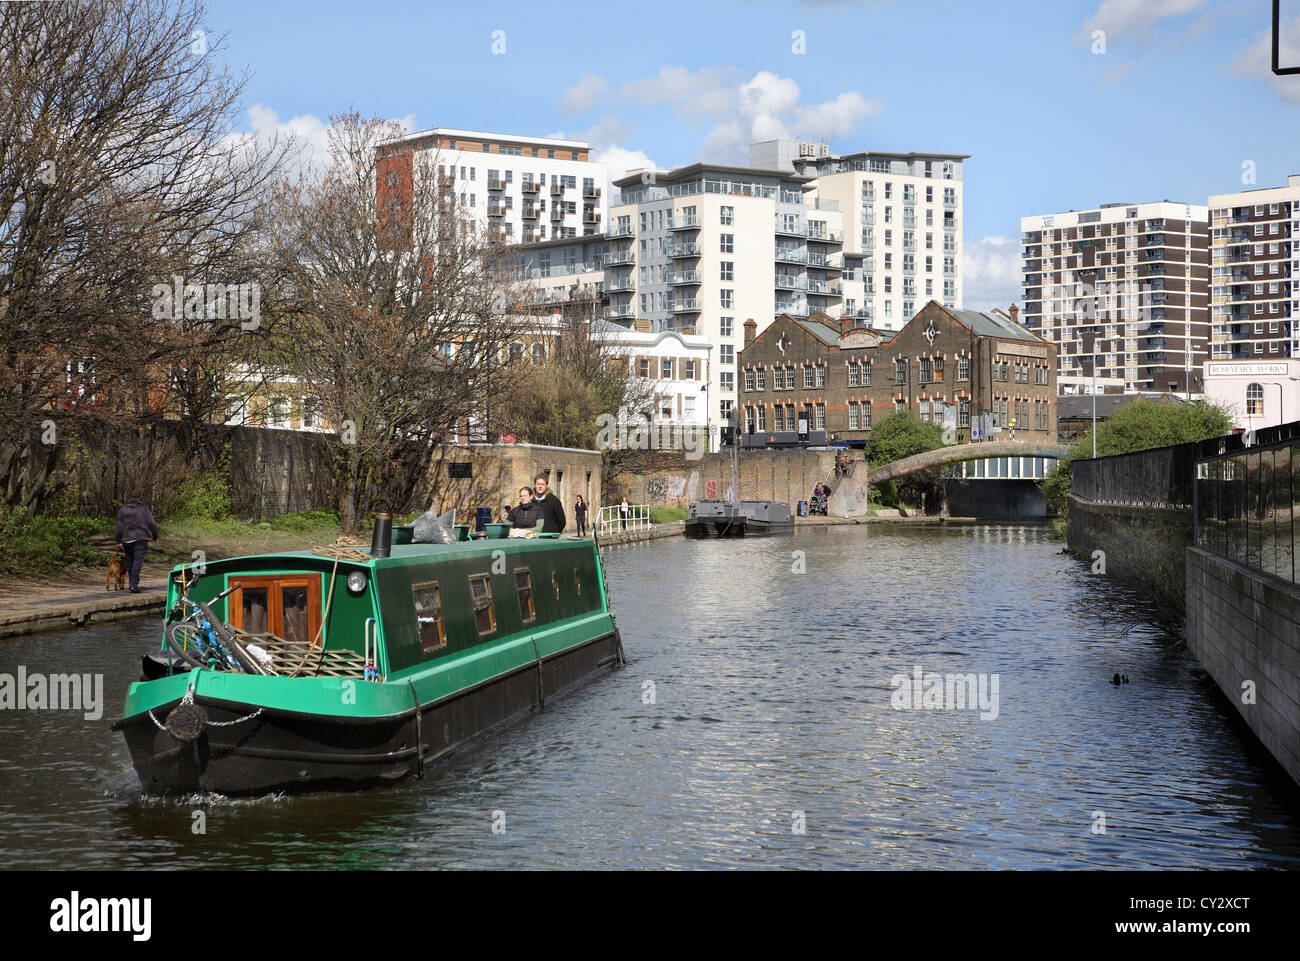 Traditional narrow boat on the Regents Canal in Hackney, Central London Stock Photo